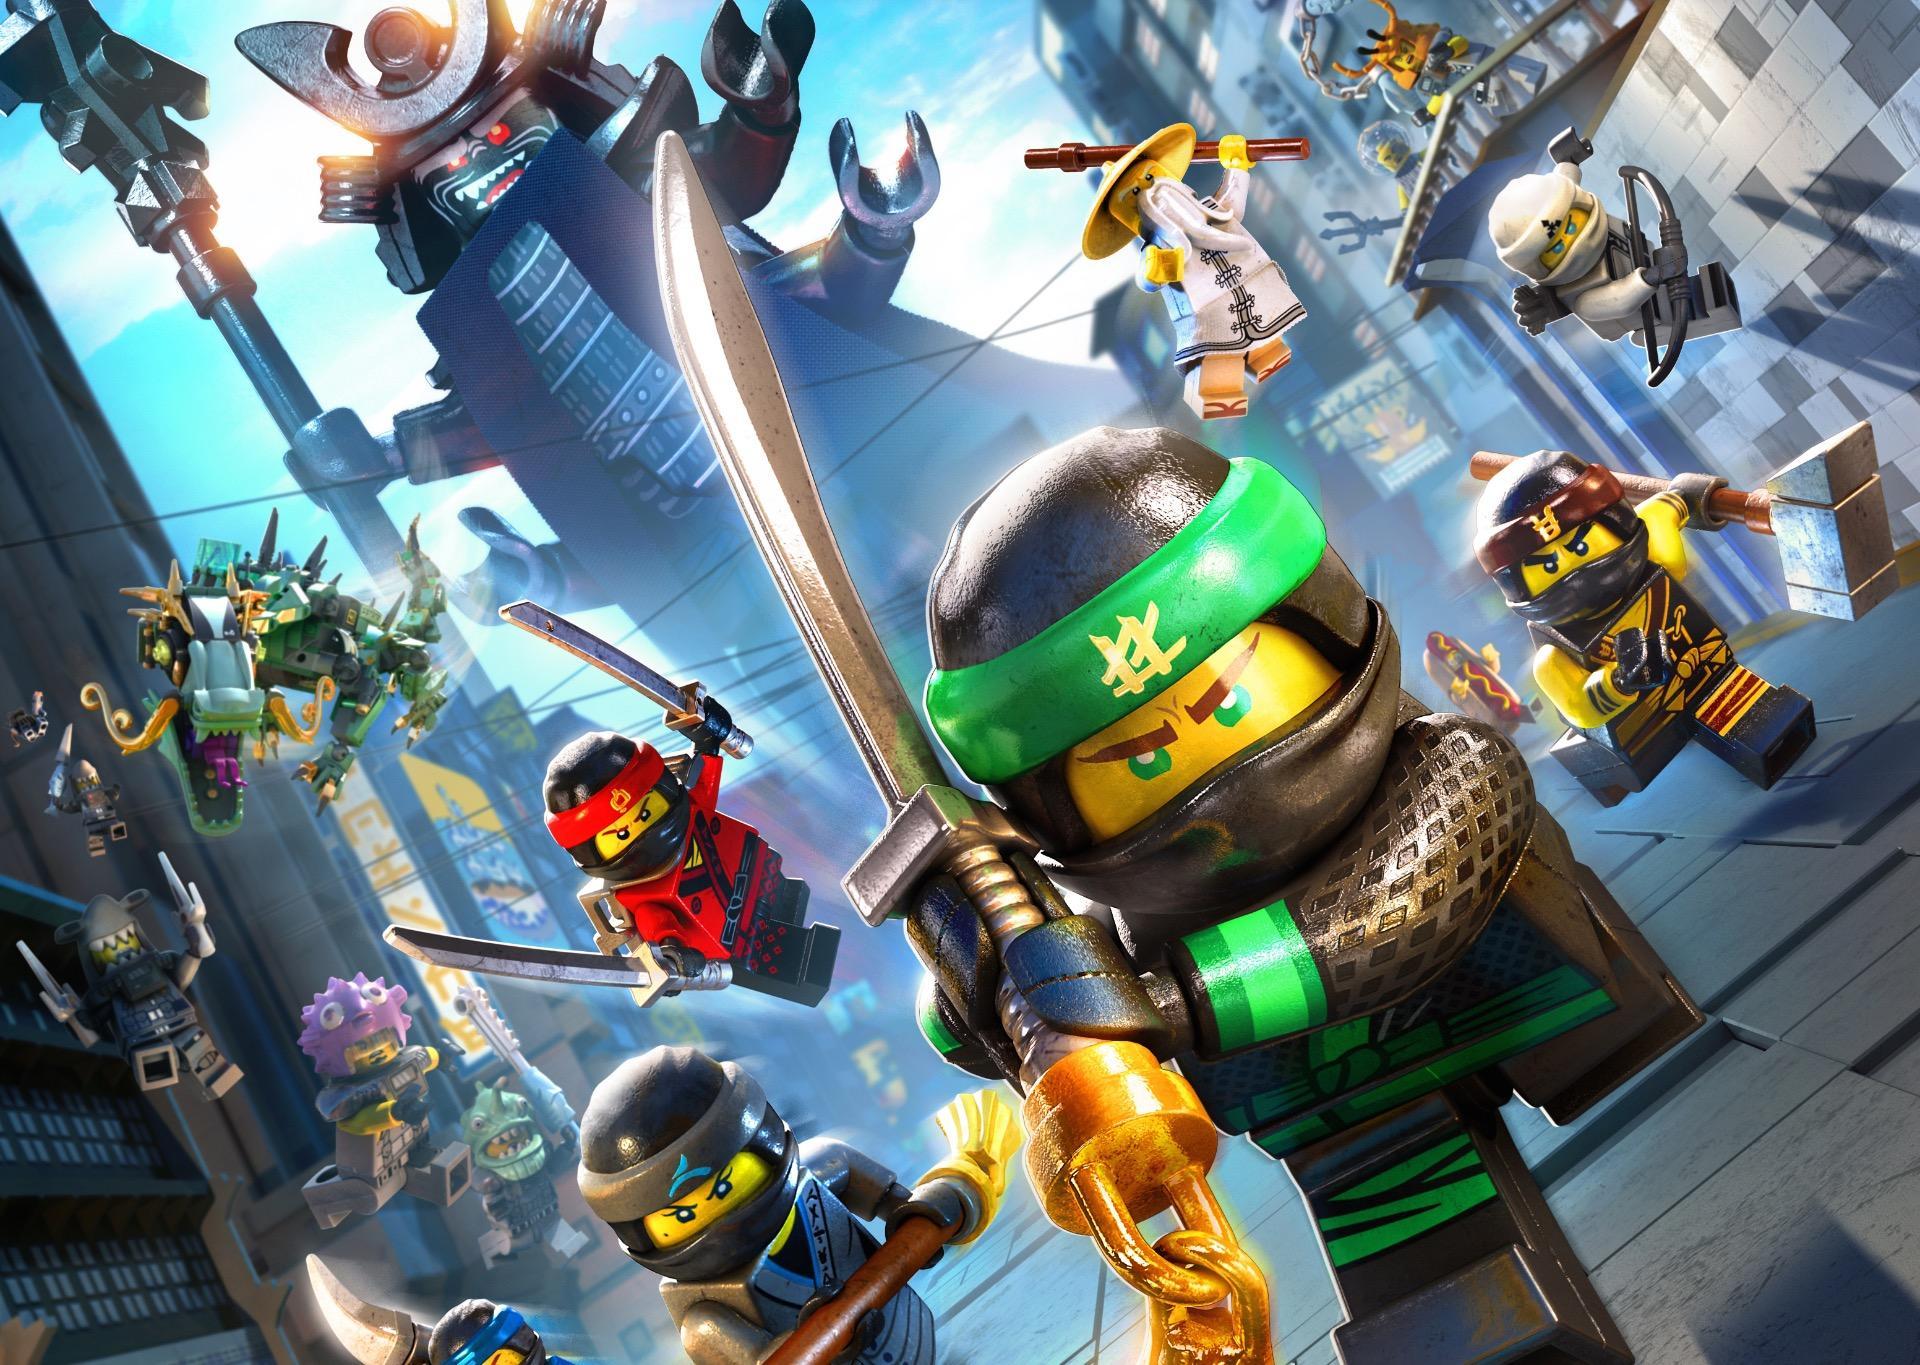 LEGO Ninjago The Video Another genuinely LEGO title | The Independent | The Independent